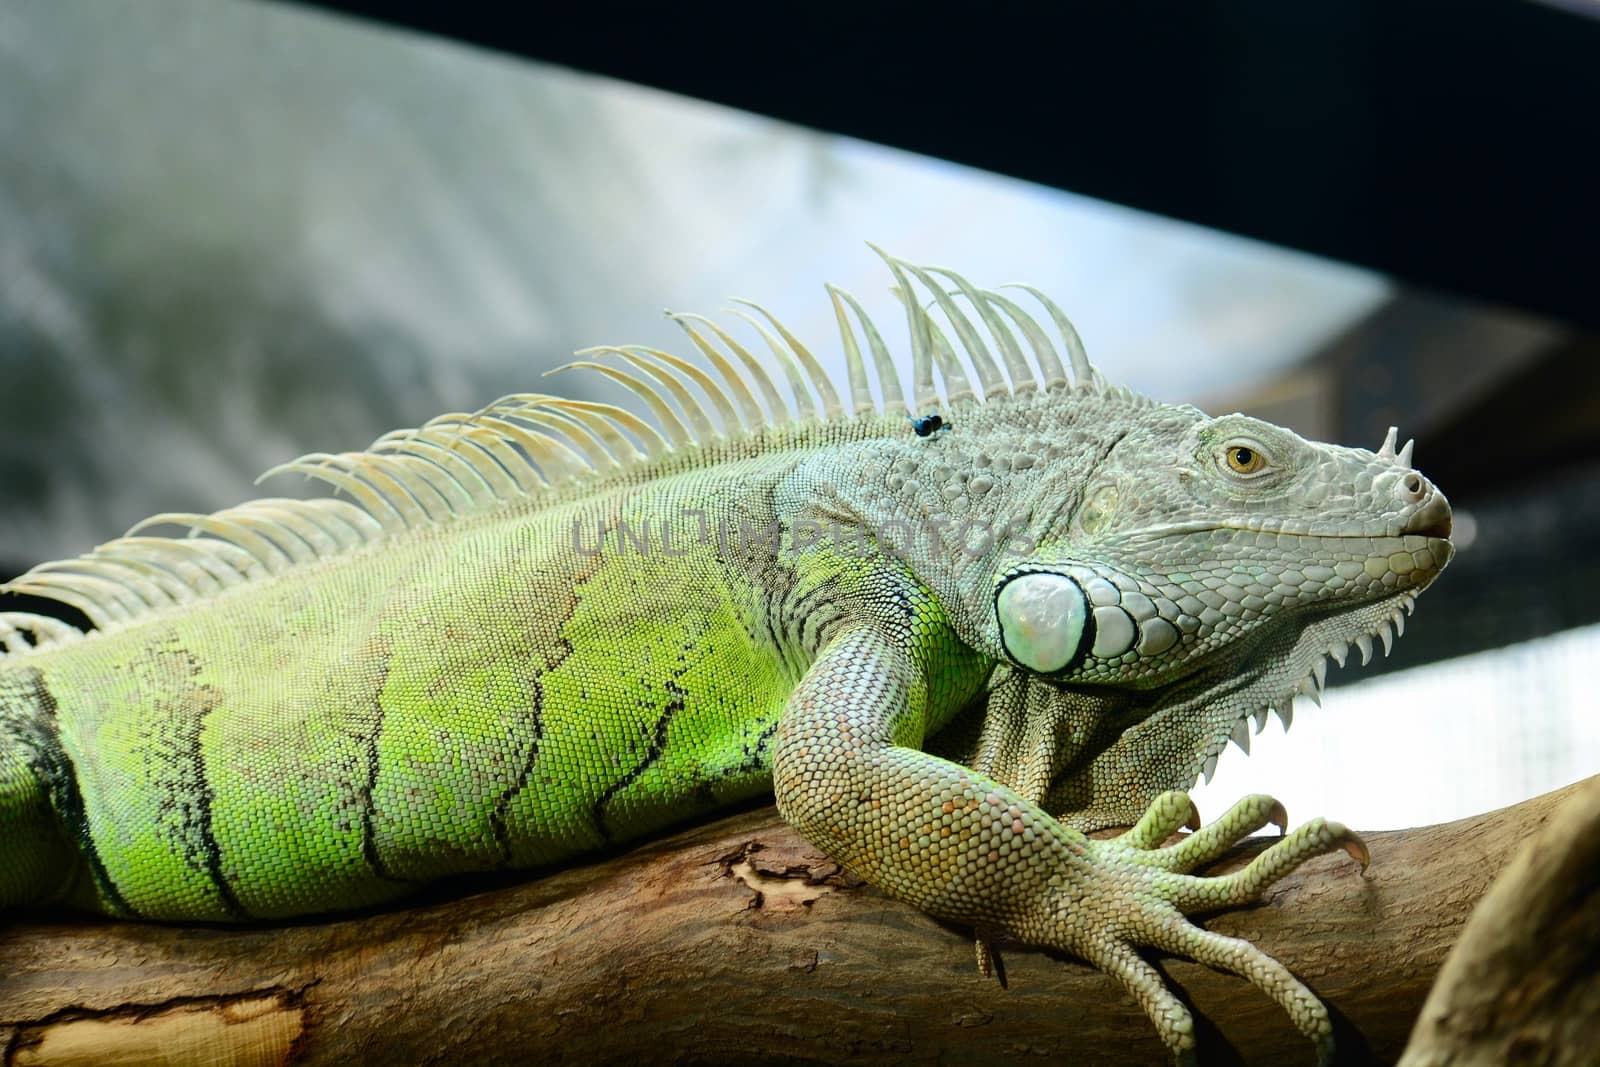 The green iguana ranges over a large geographic area in South America. Commonly found in captivity as a pet due to its calm disposition and bright colors